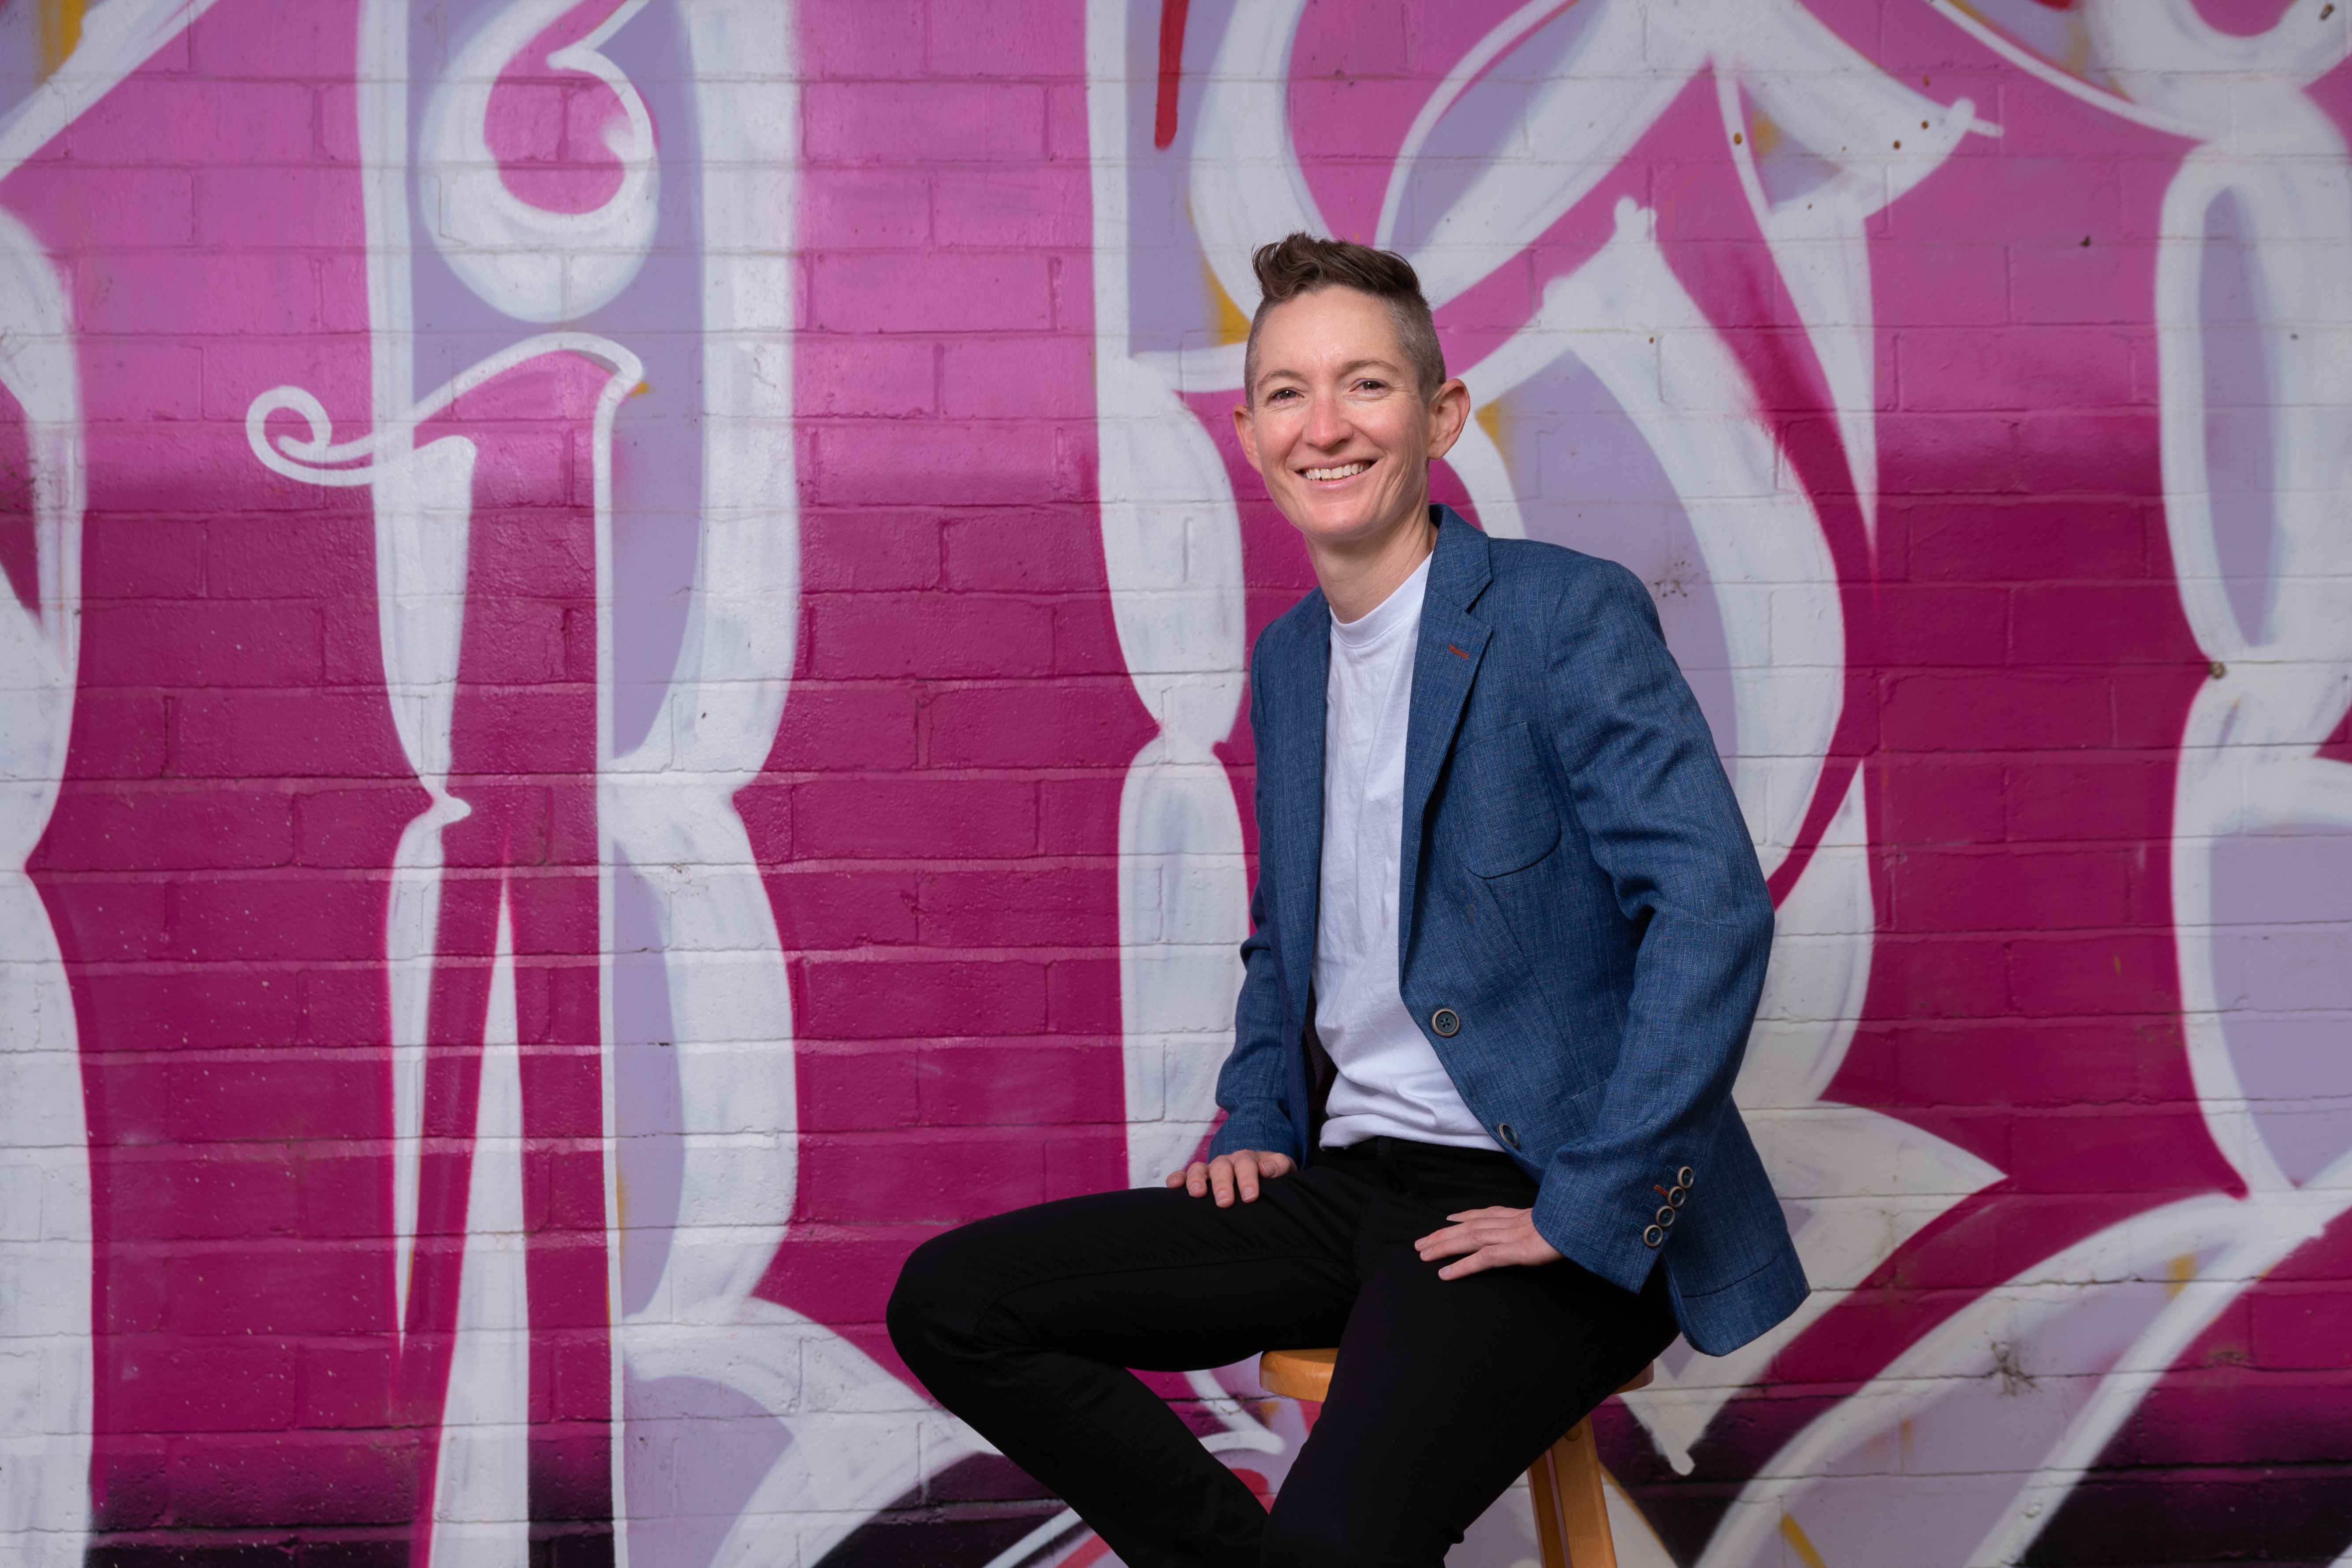 Bree is sitting on a stool in front of a wall that has been painted in pink graffiti. They are wearing a grey blazer and have short hair. They are smiling at the camera. 